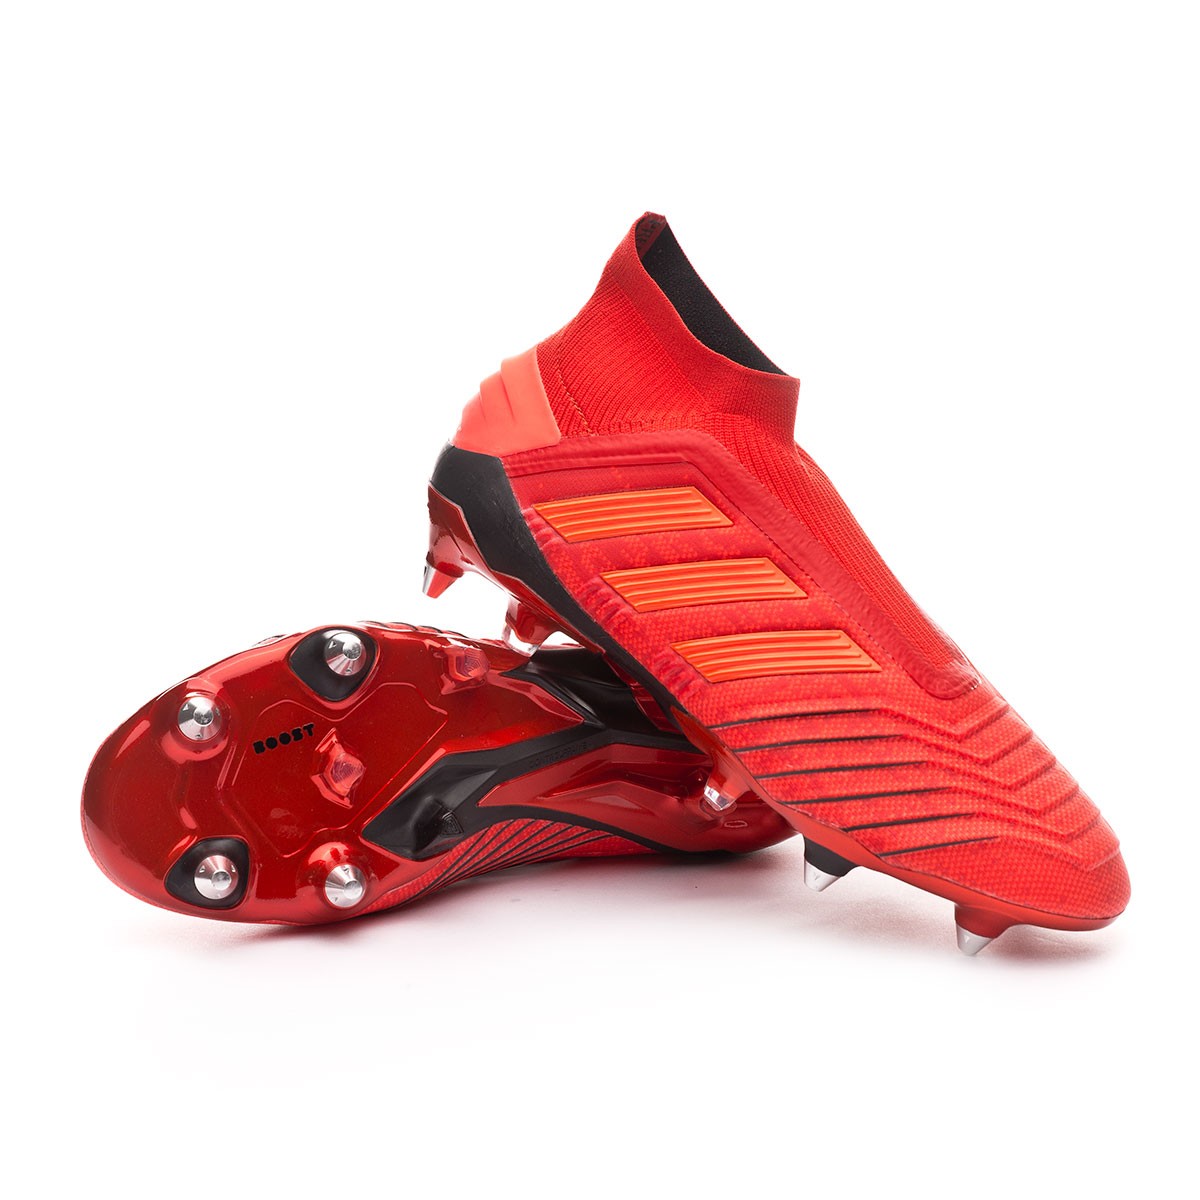 Football Boots adidas Predator 19+ SG Active red-Solar red-Core black -  Football store Fútbol Emotion